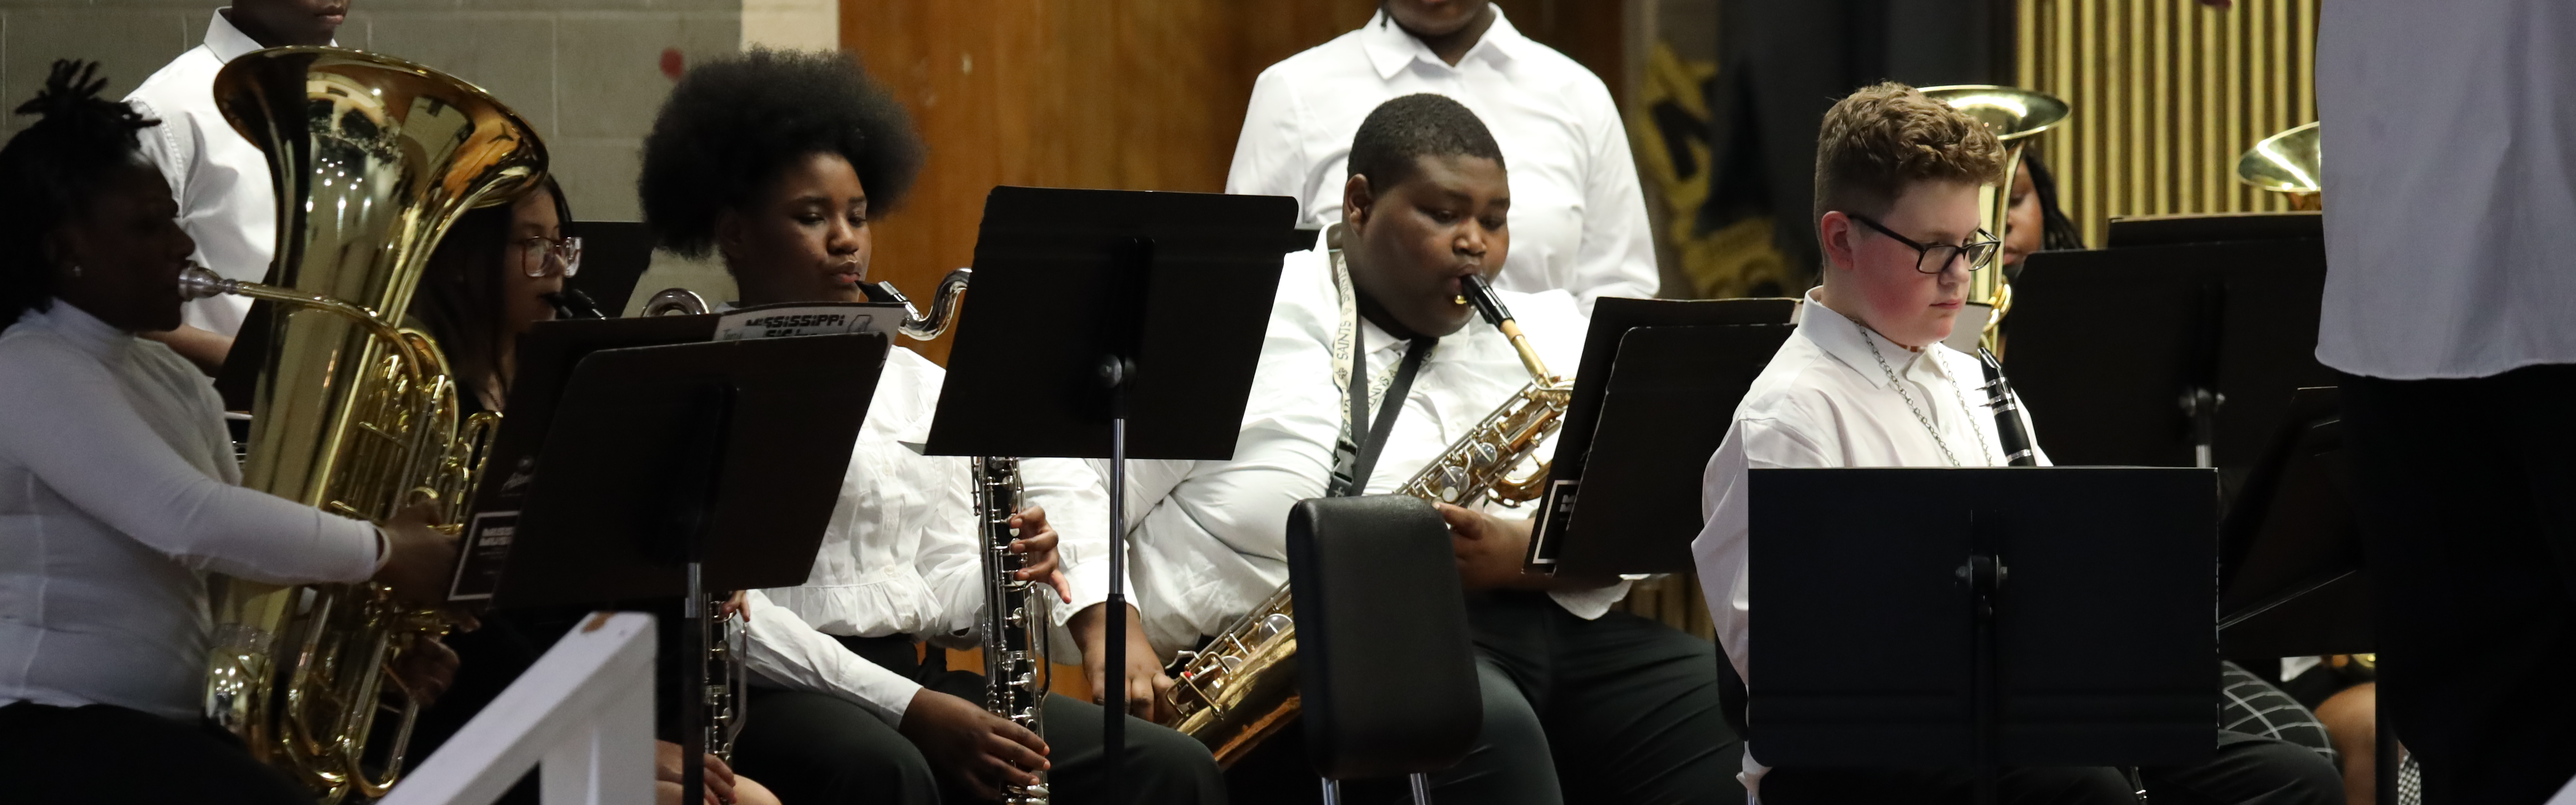 Four students are playing musical instruments in a concert ensemble. Two female students are playing bass clarinets, while the male student seated next to them is playing a baritone saxophone. Another male student is holding his clarinet.